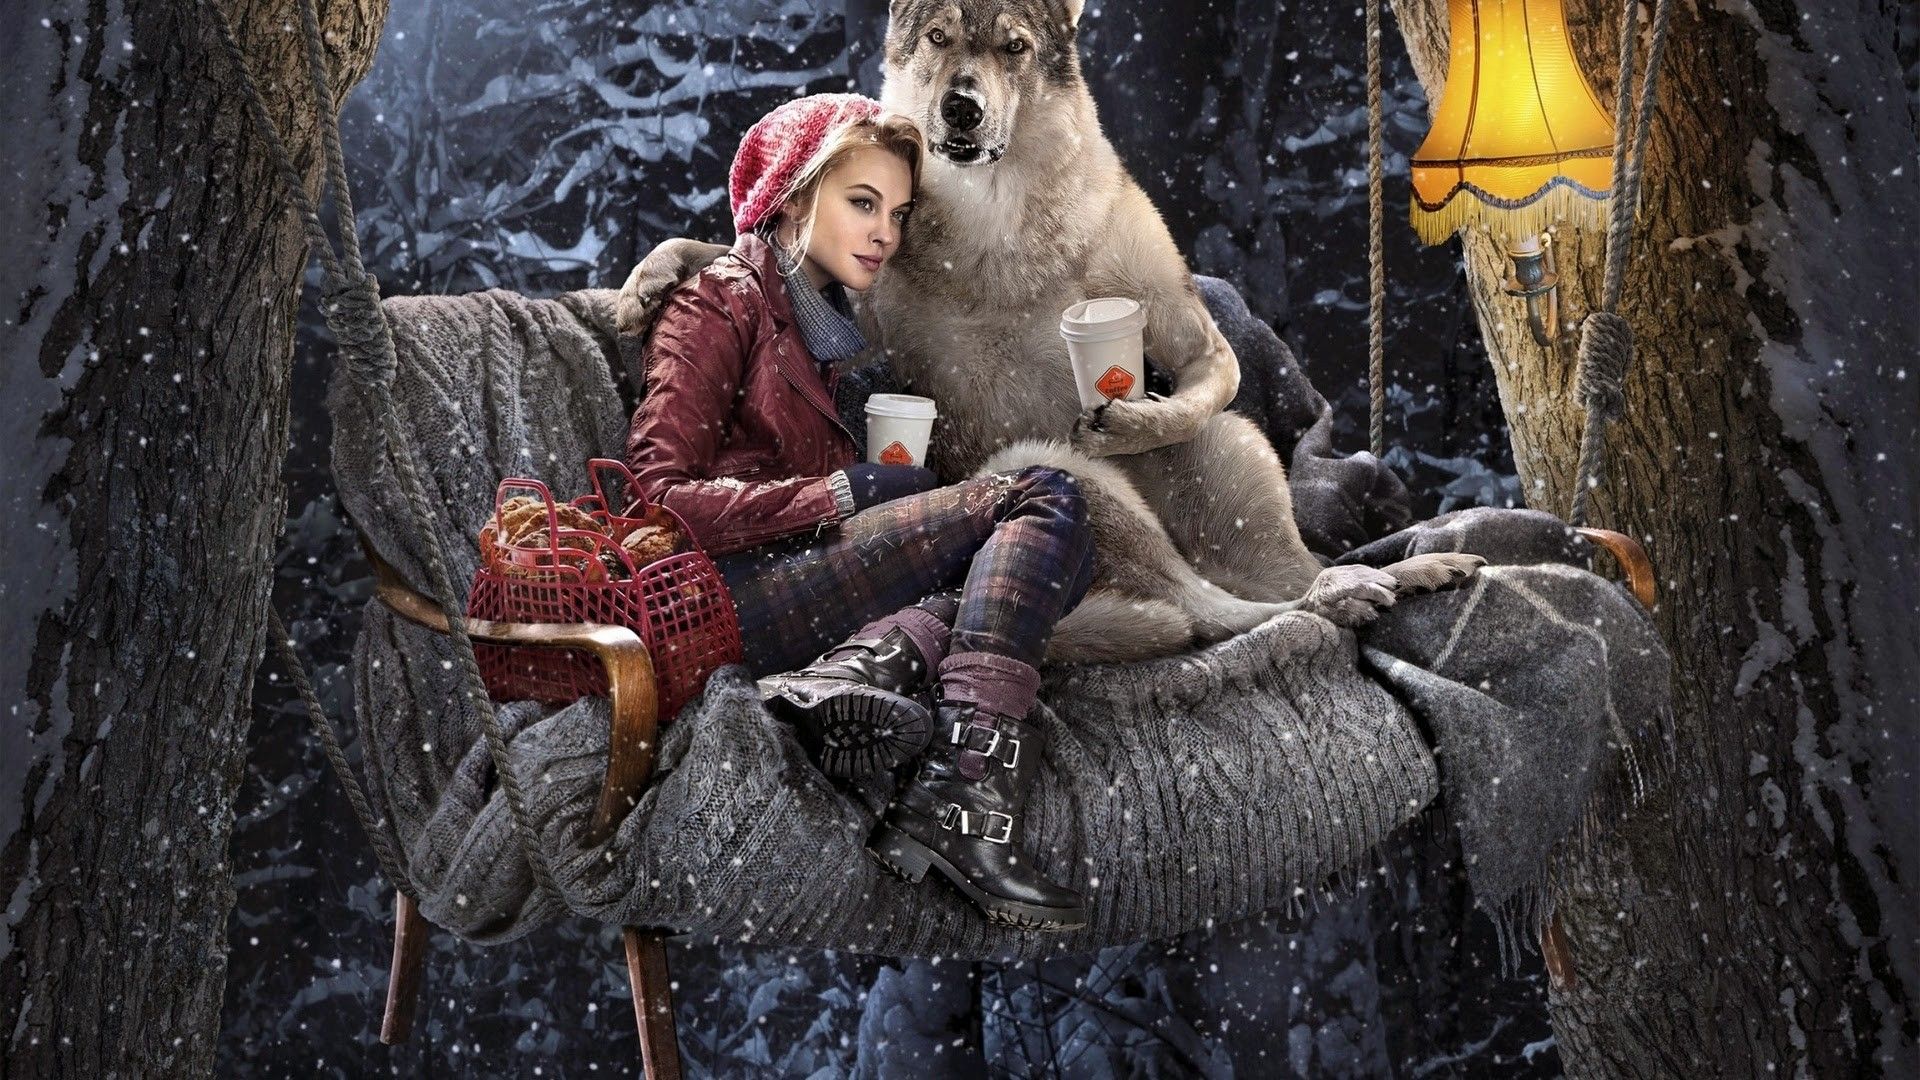 Wallpaper Red Riding Hood, wolf, drink coffee, forest, night, tree